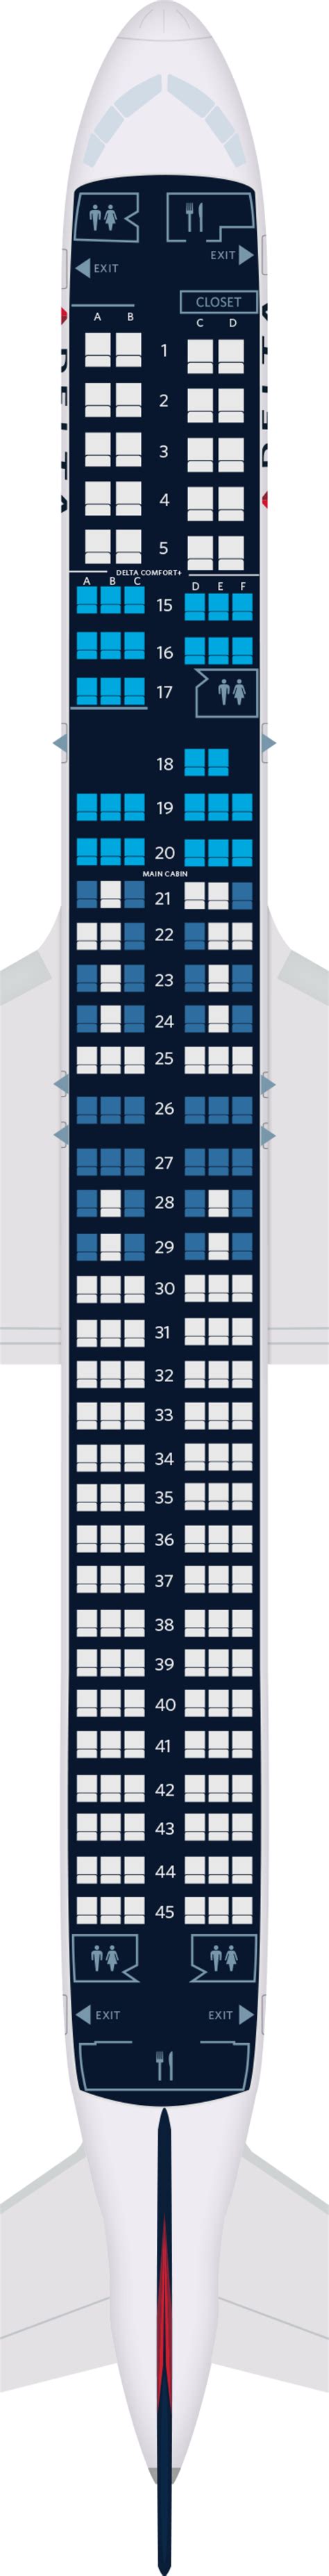 14 Delta Airlines Seating Chart 757